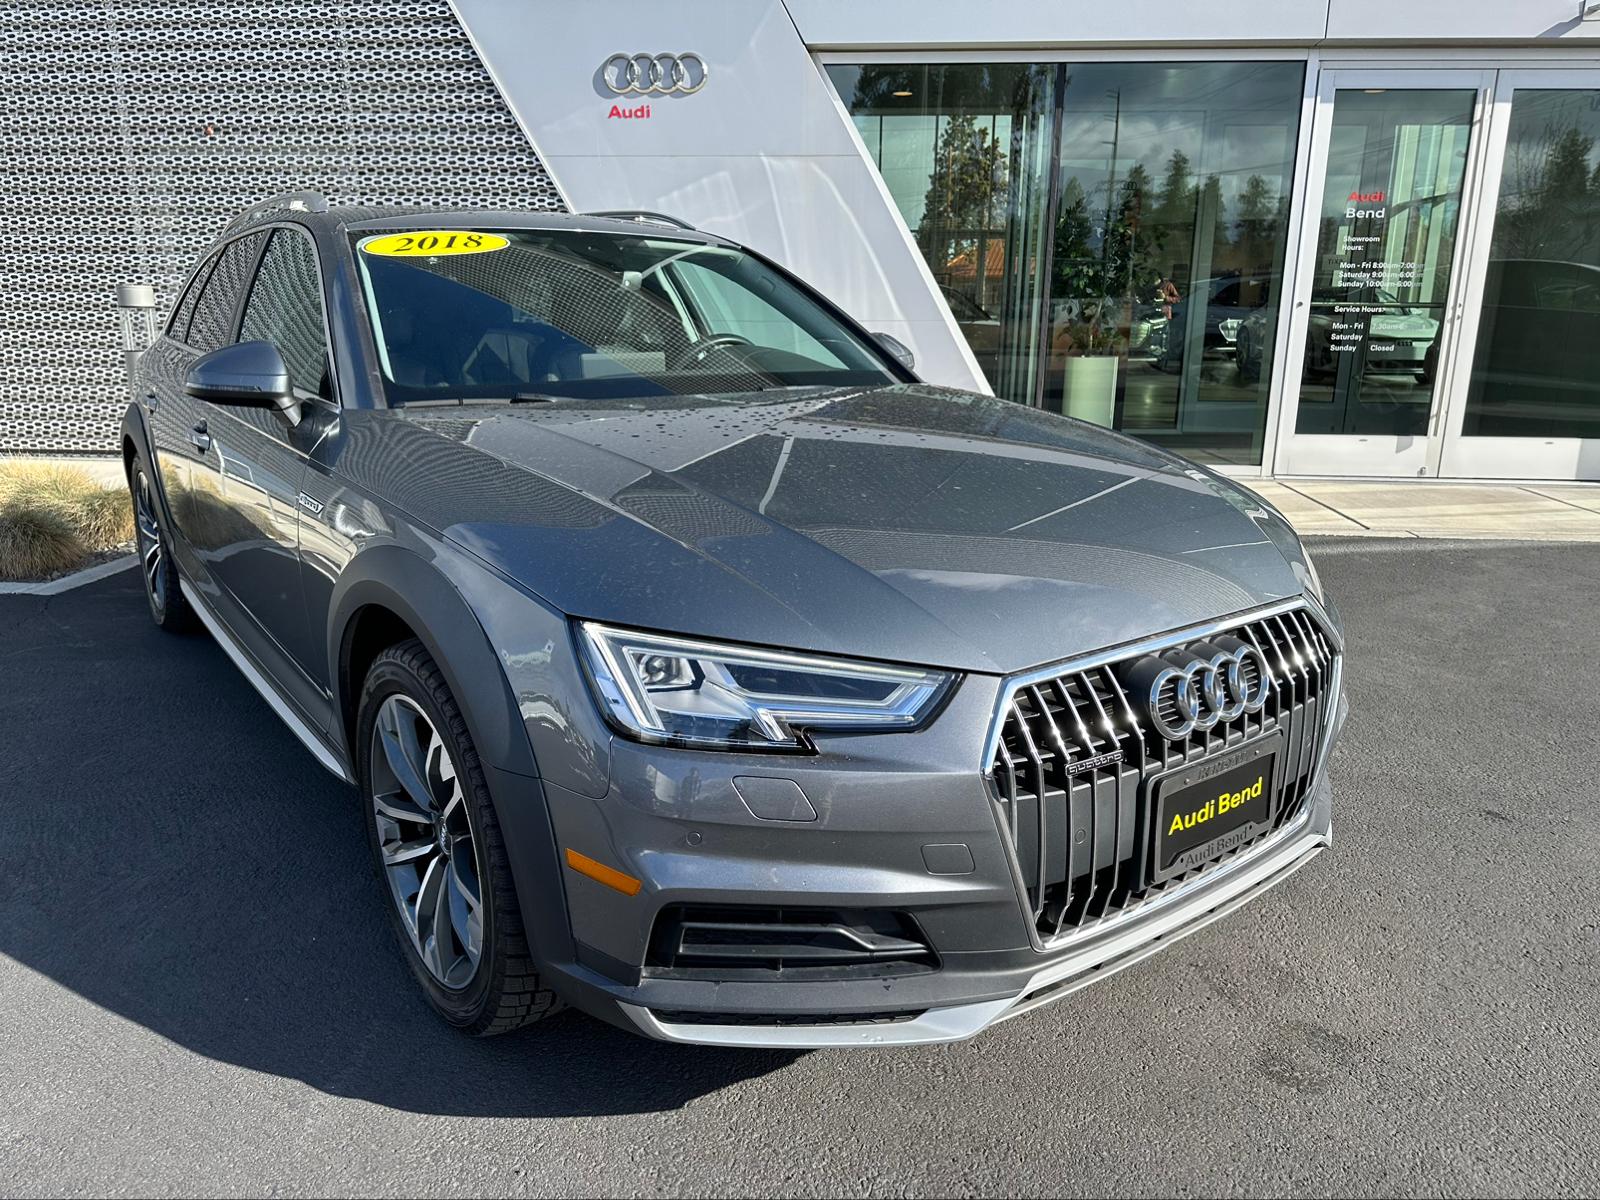 Pre-Owned 2018 Audi A4 allroad 2.0 TFSI Premium Plus Station Wagon for Sale  #BTC4124 | Kendall BMW of Bend